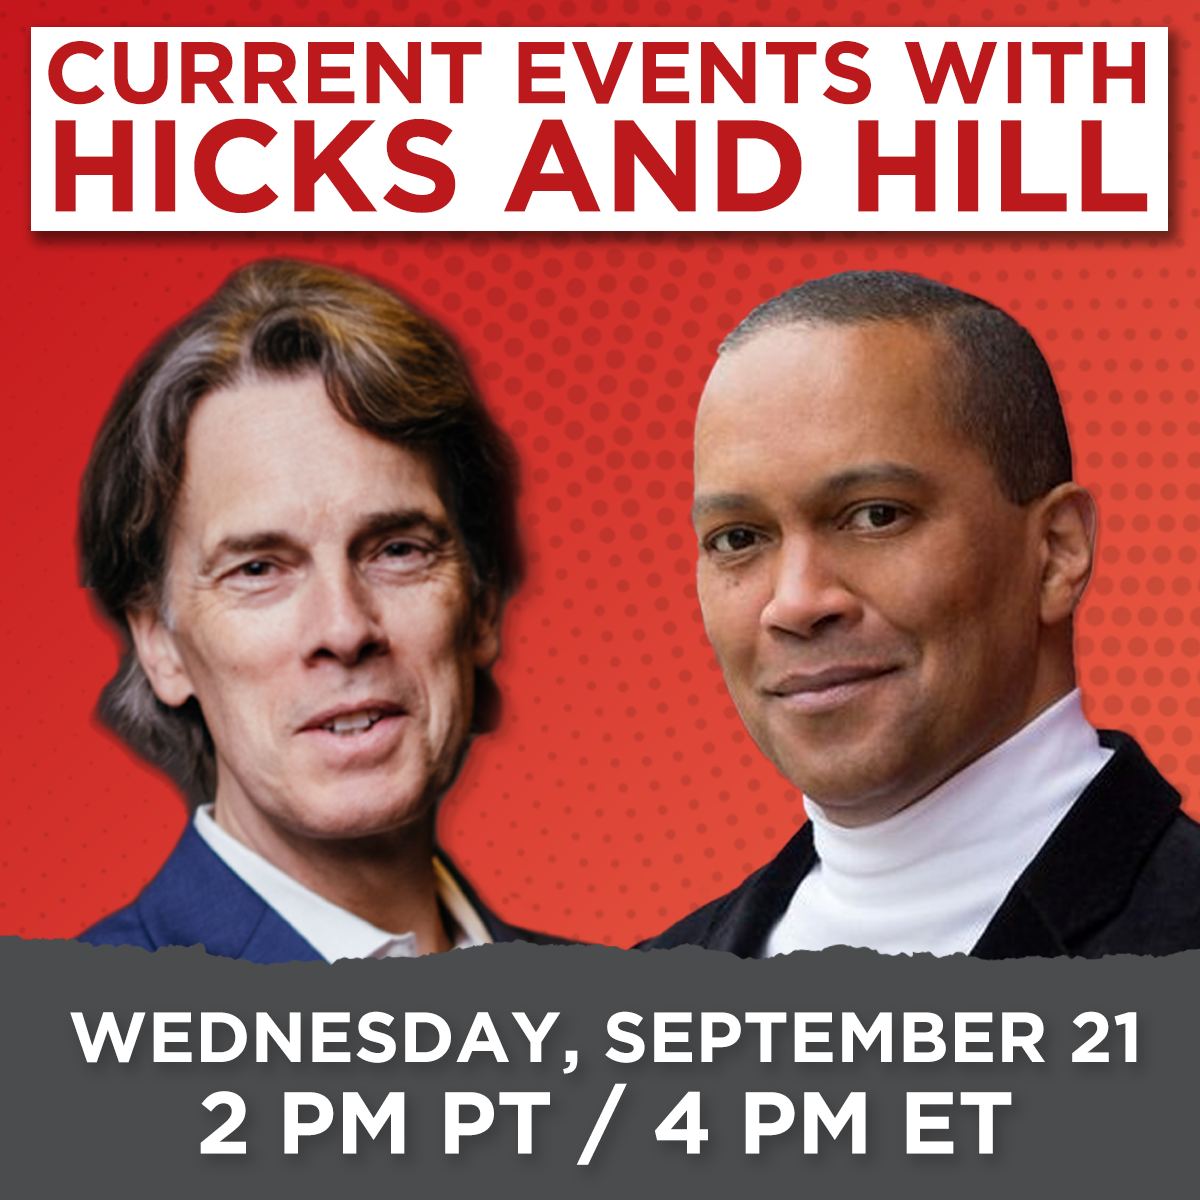 On Declining Humanities Majors & CRT/LGBTQ Teaching in Schools: Current Events with Hicks and Hill